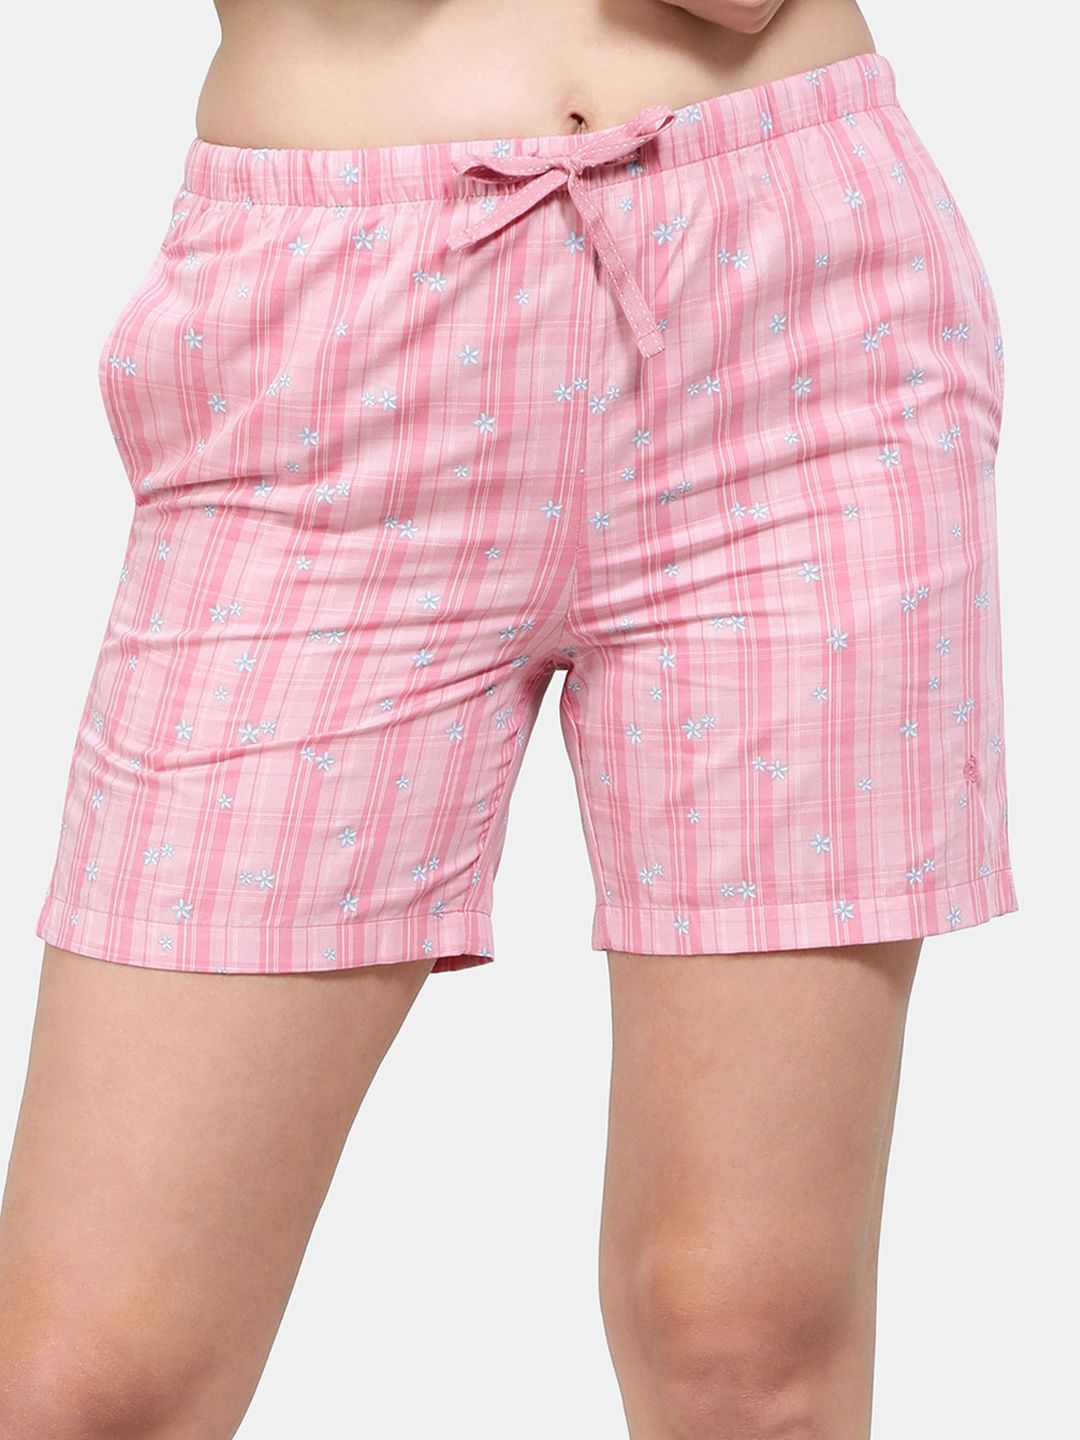 Jockey Women Checked Mid Rise Cotton Shorts Price in India